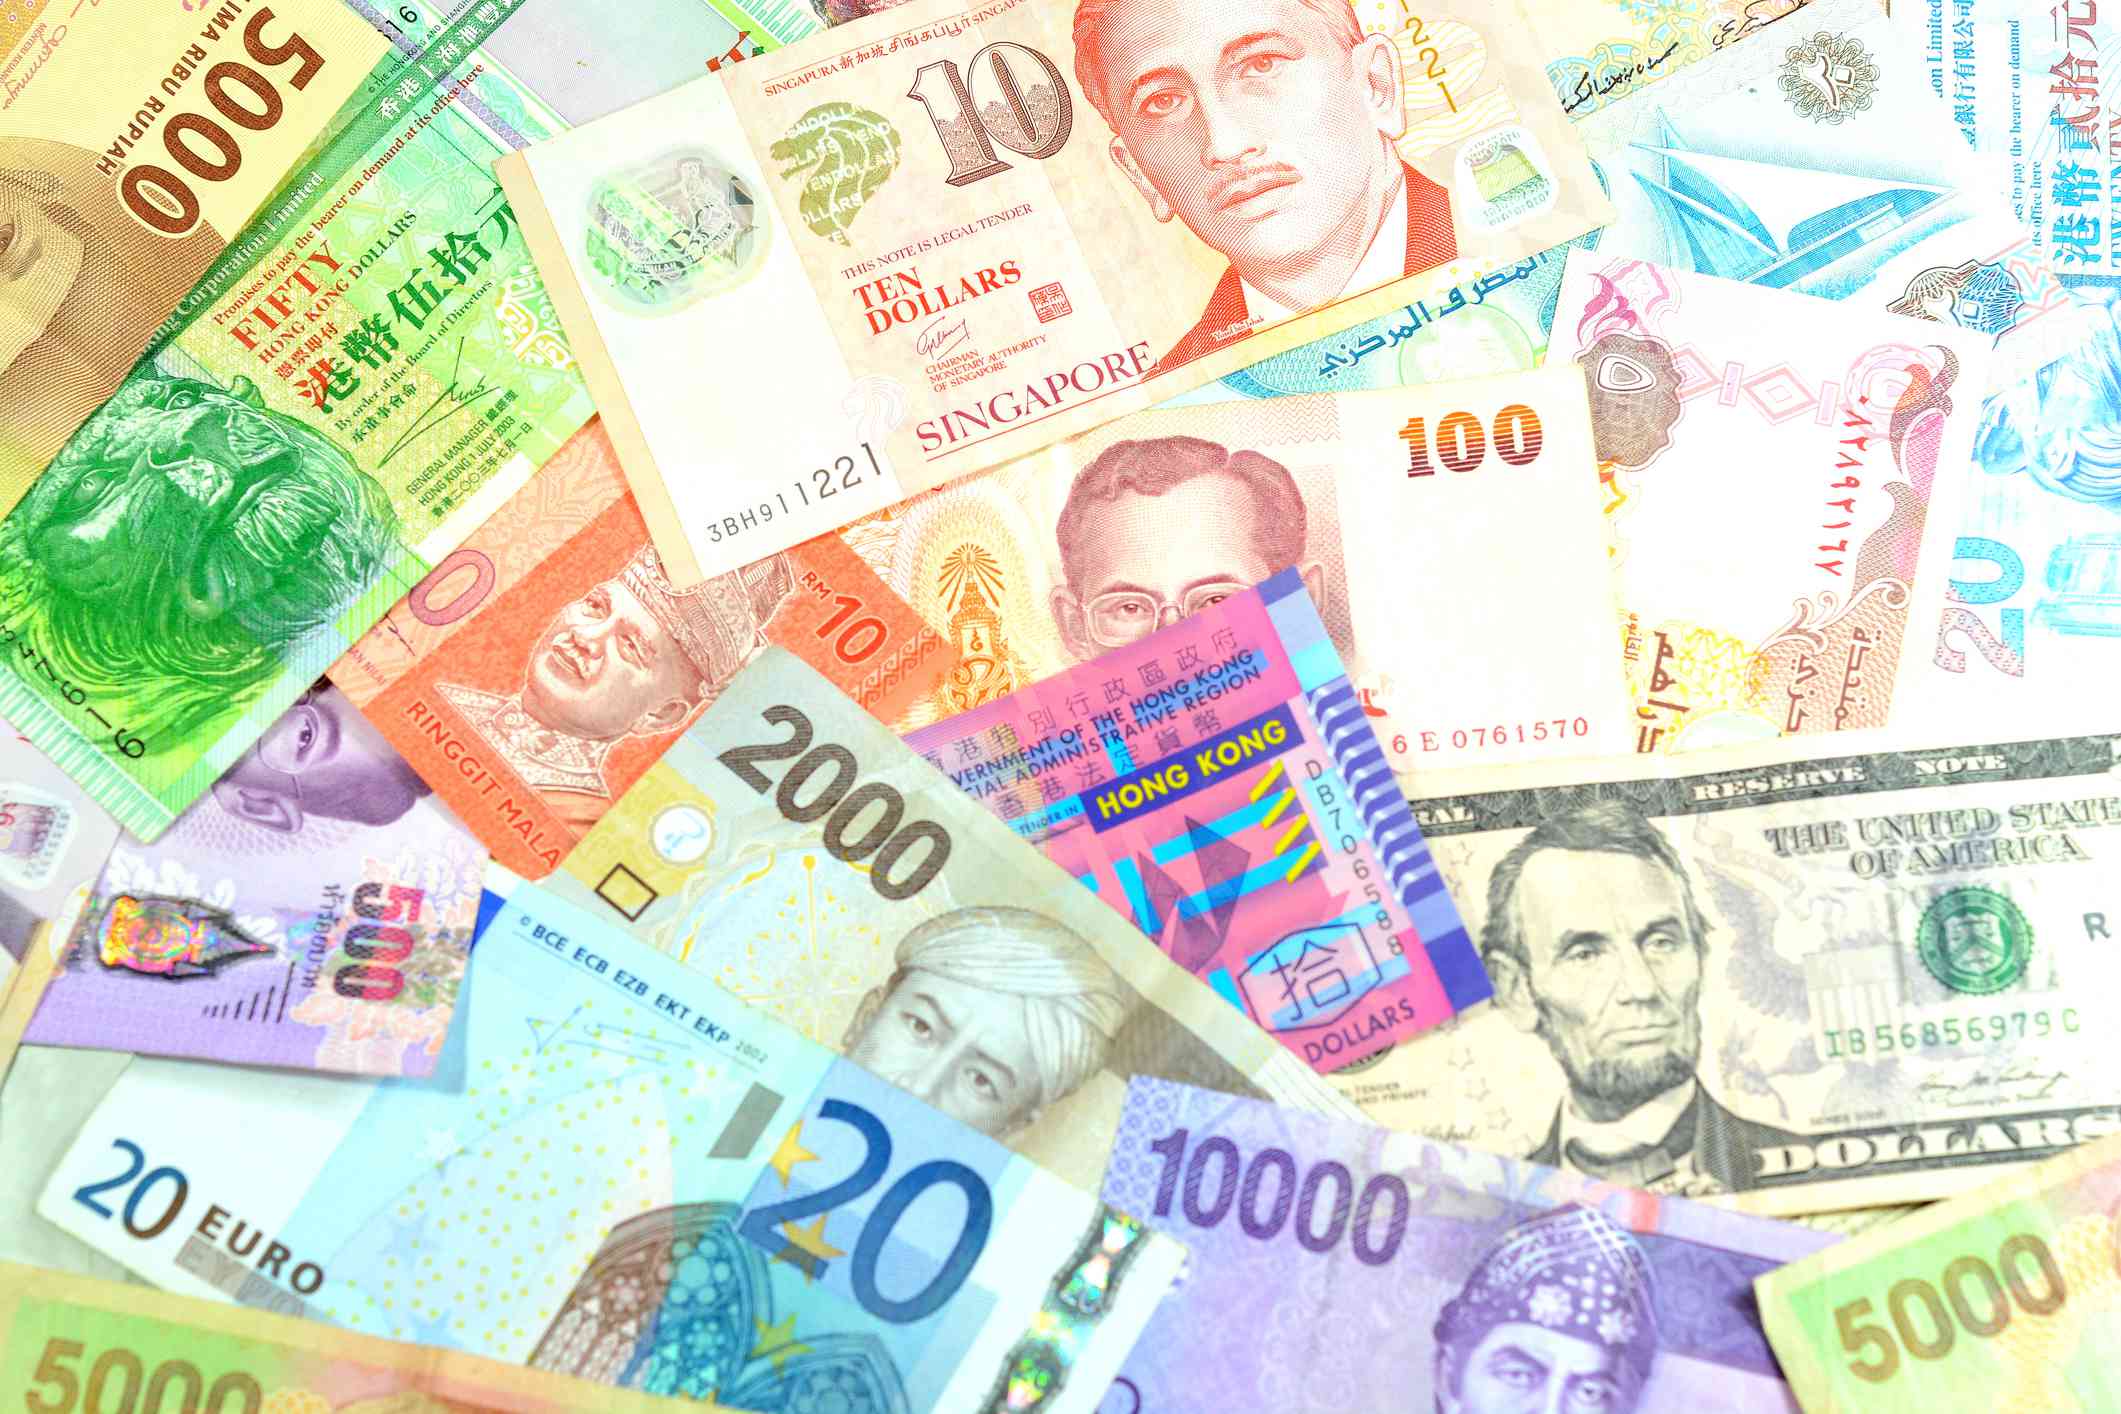 Foreign Currency bills laid out